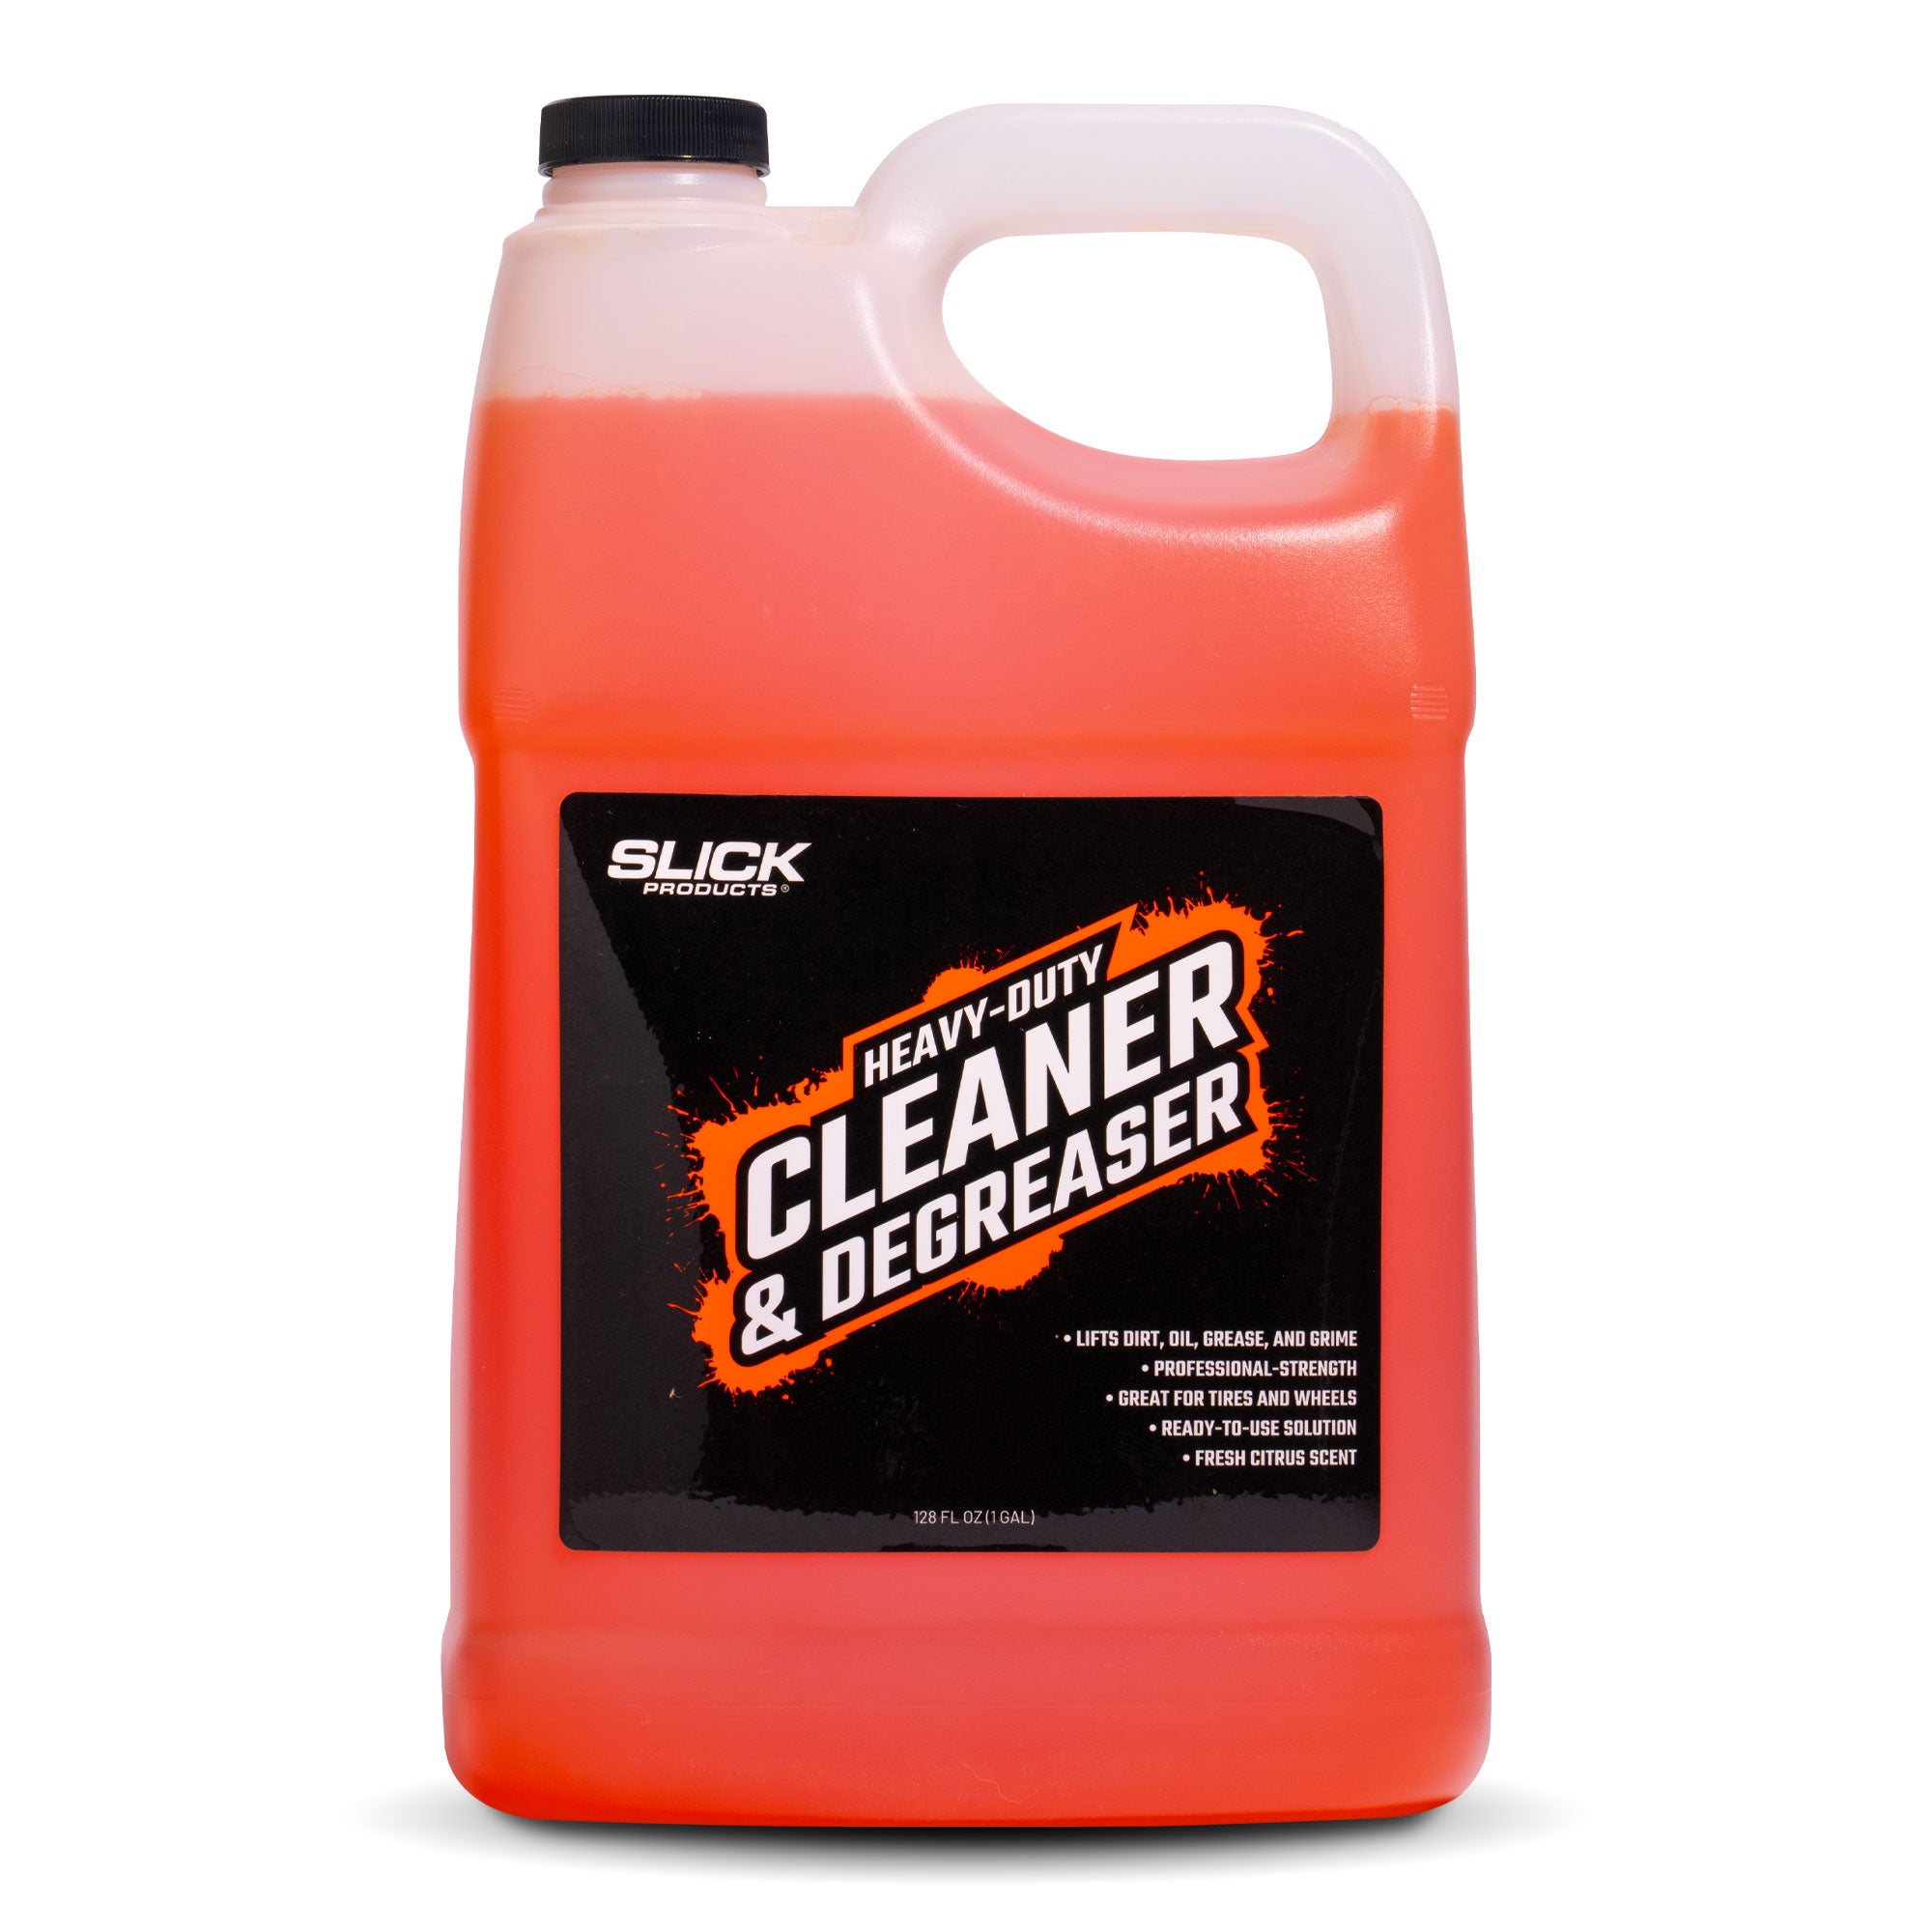 3 gallons of Tire Shine, 1 gallon Concentrated Degreaser